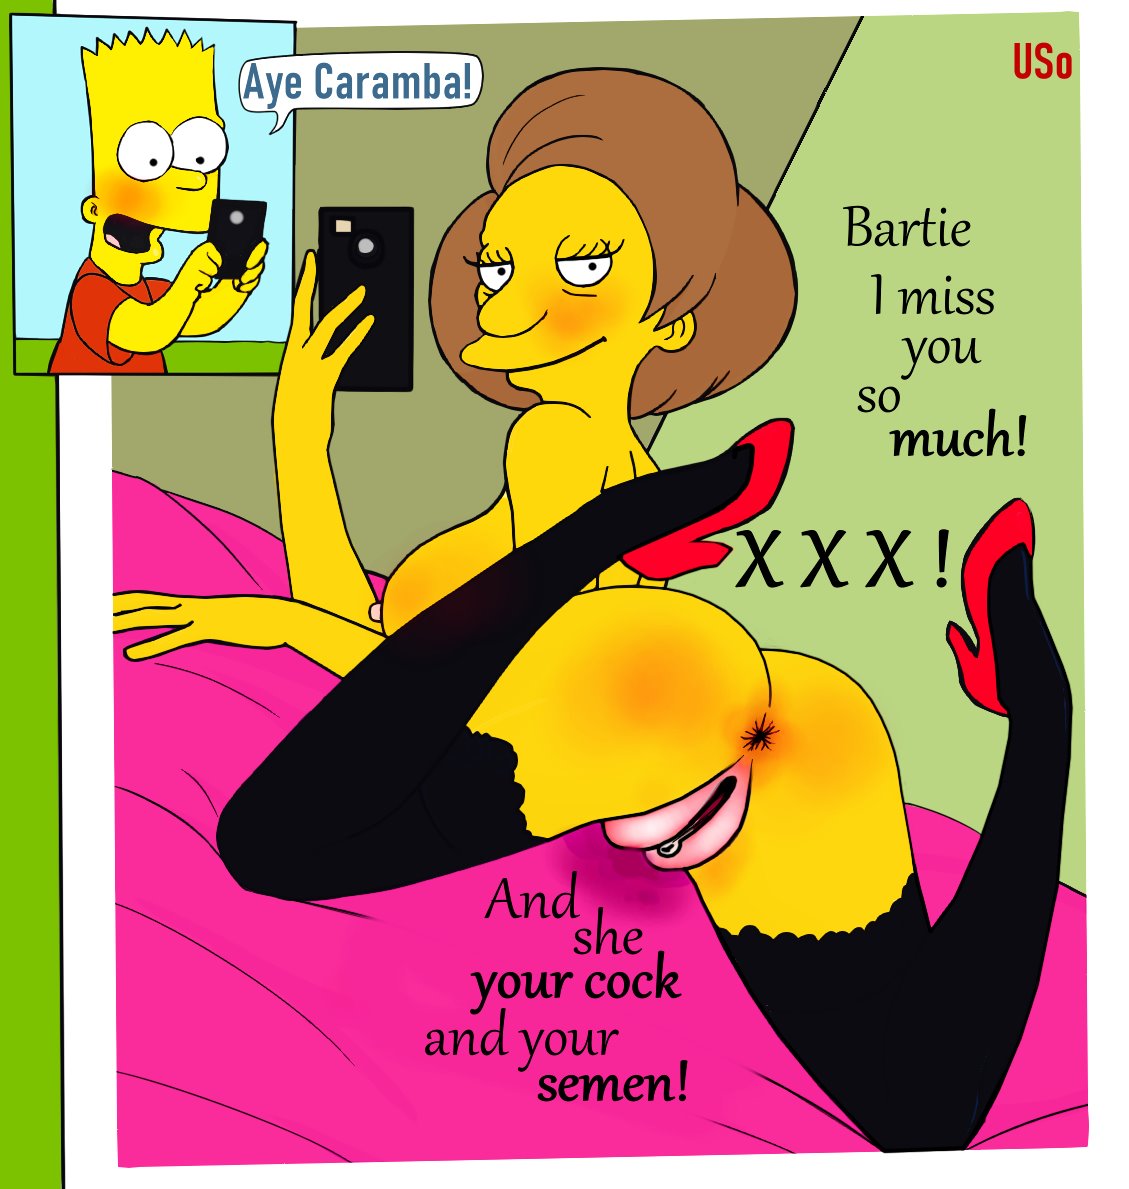 bart_simpson black_red_gold_brown_for_marion edna_krabappel tagme the_simpsons